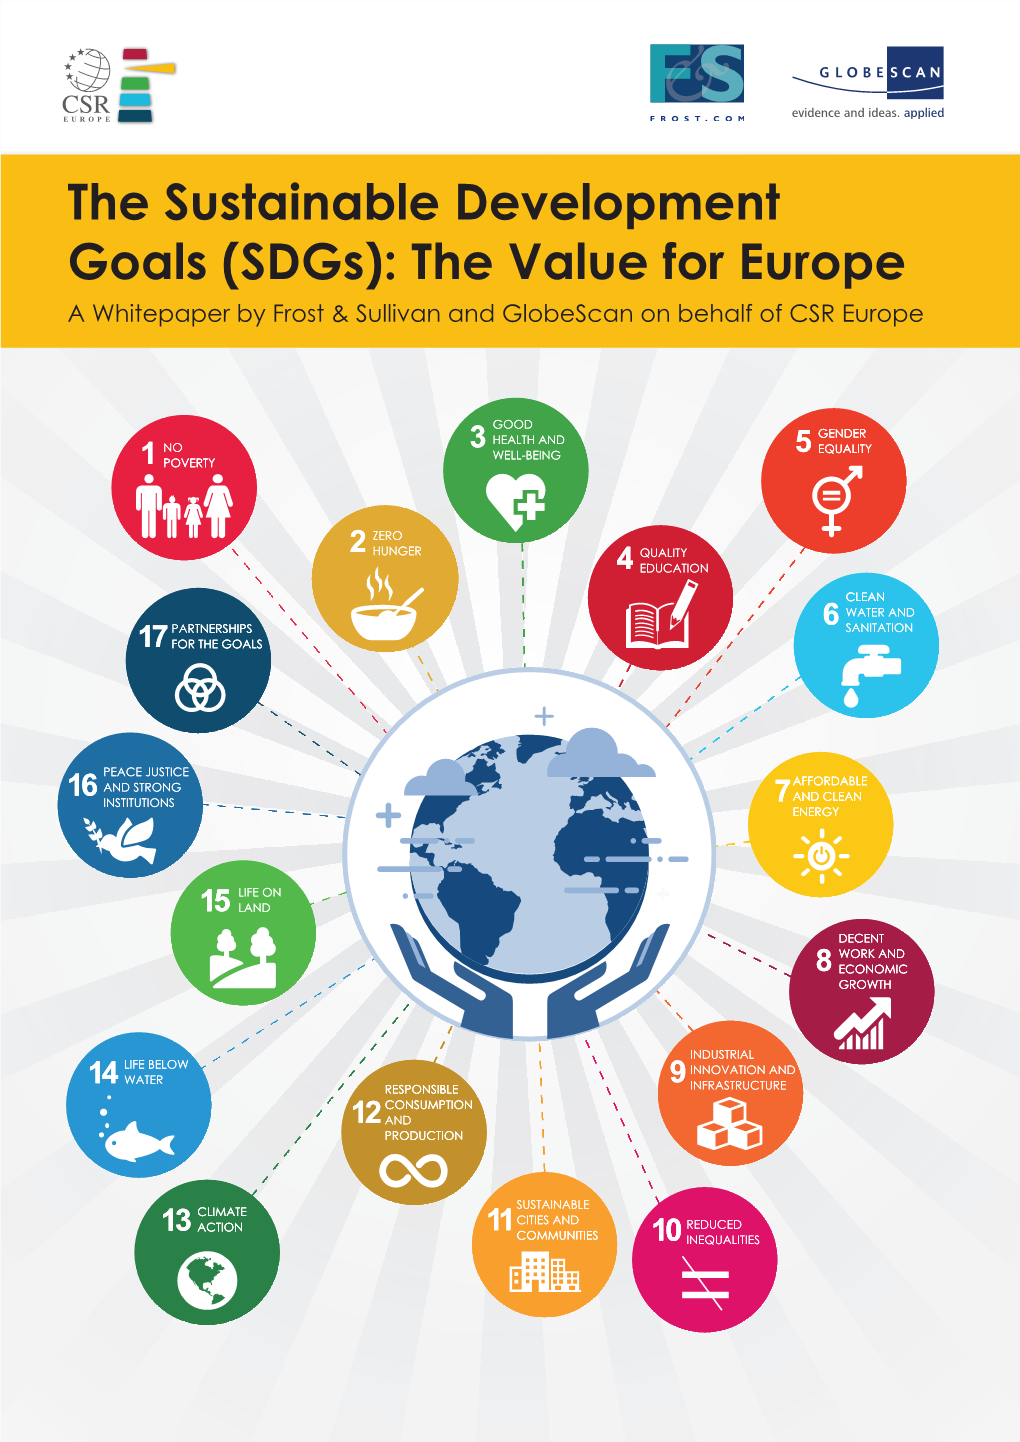 The Sustainable Development Goals (Sdgs): the Value for Europe a Whitepaper by Frost & Sullivan and Globescan on Behalf of CSR Europe